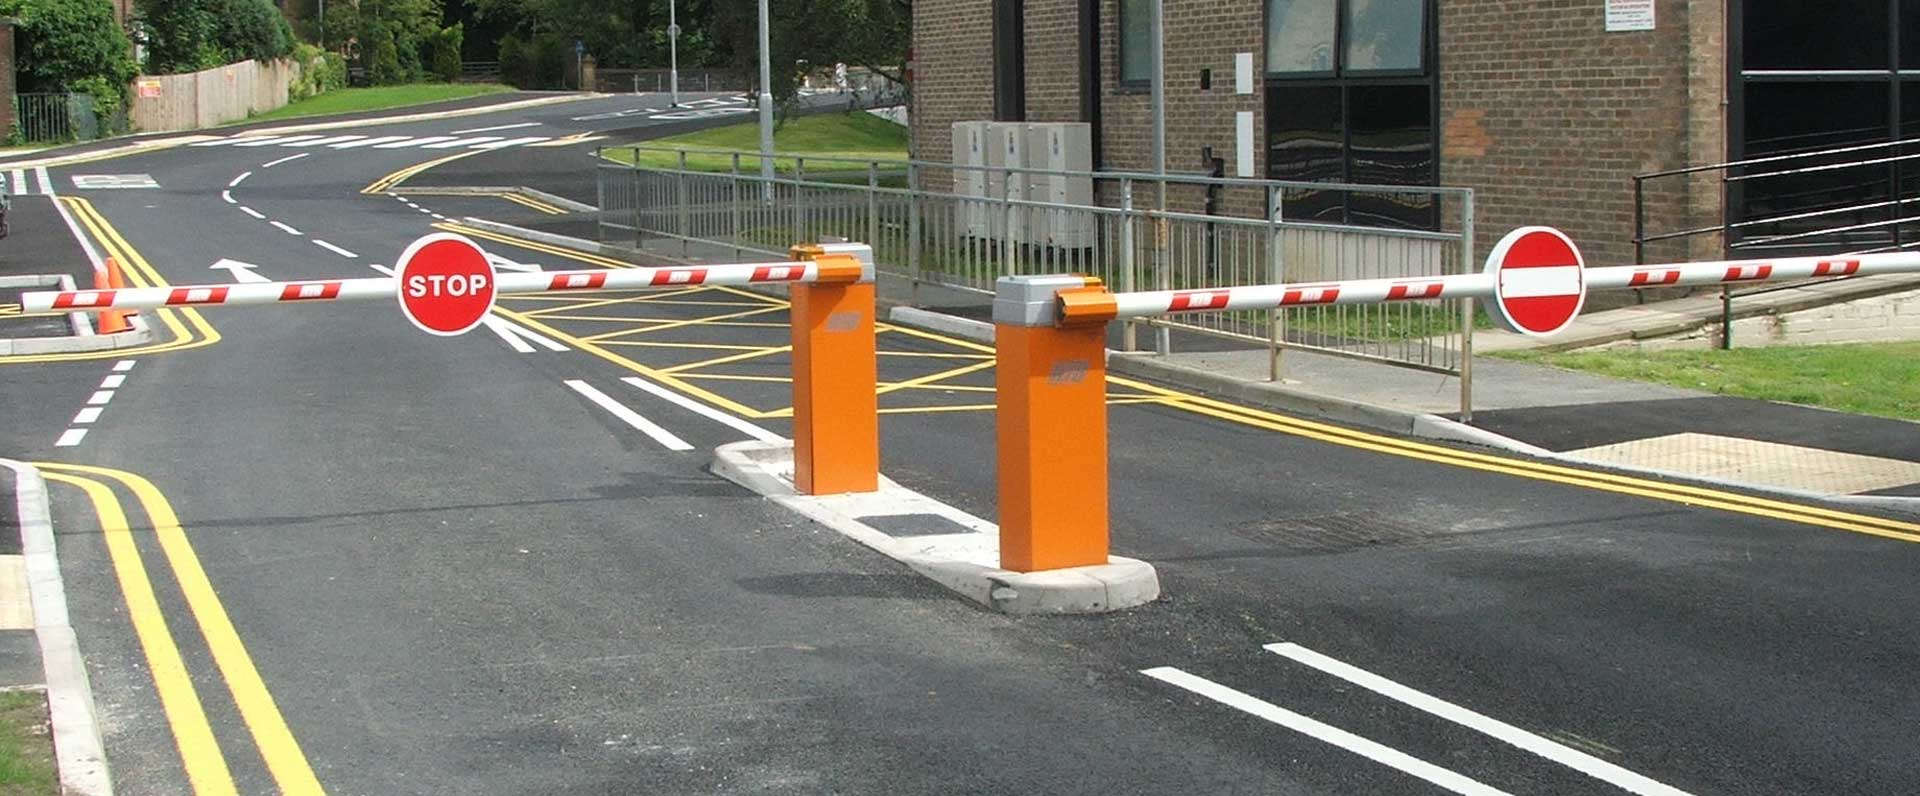 Gate Barriers